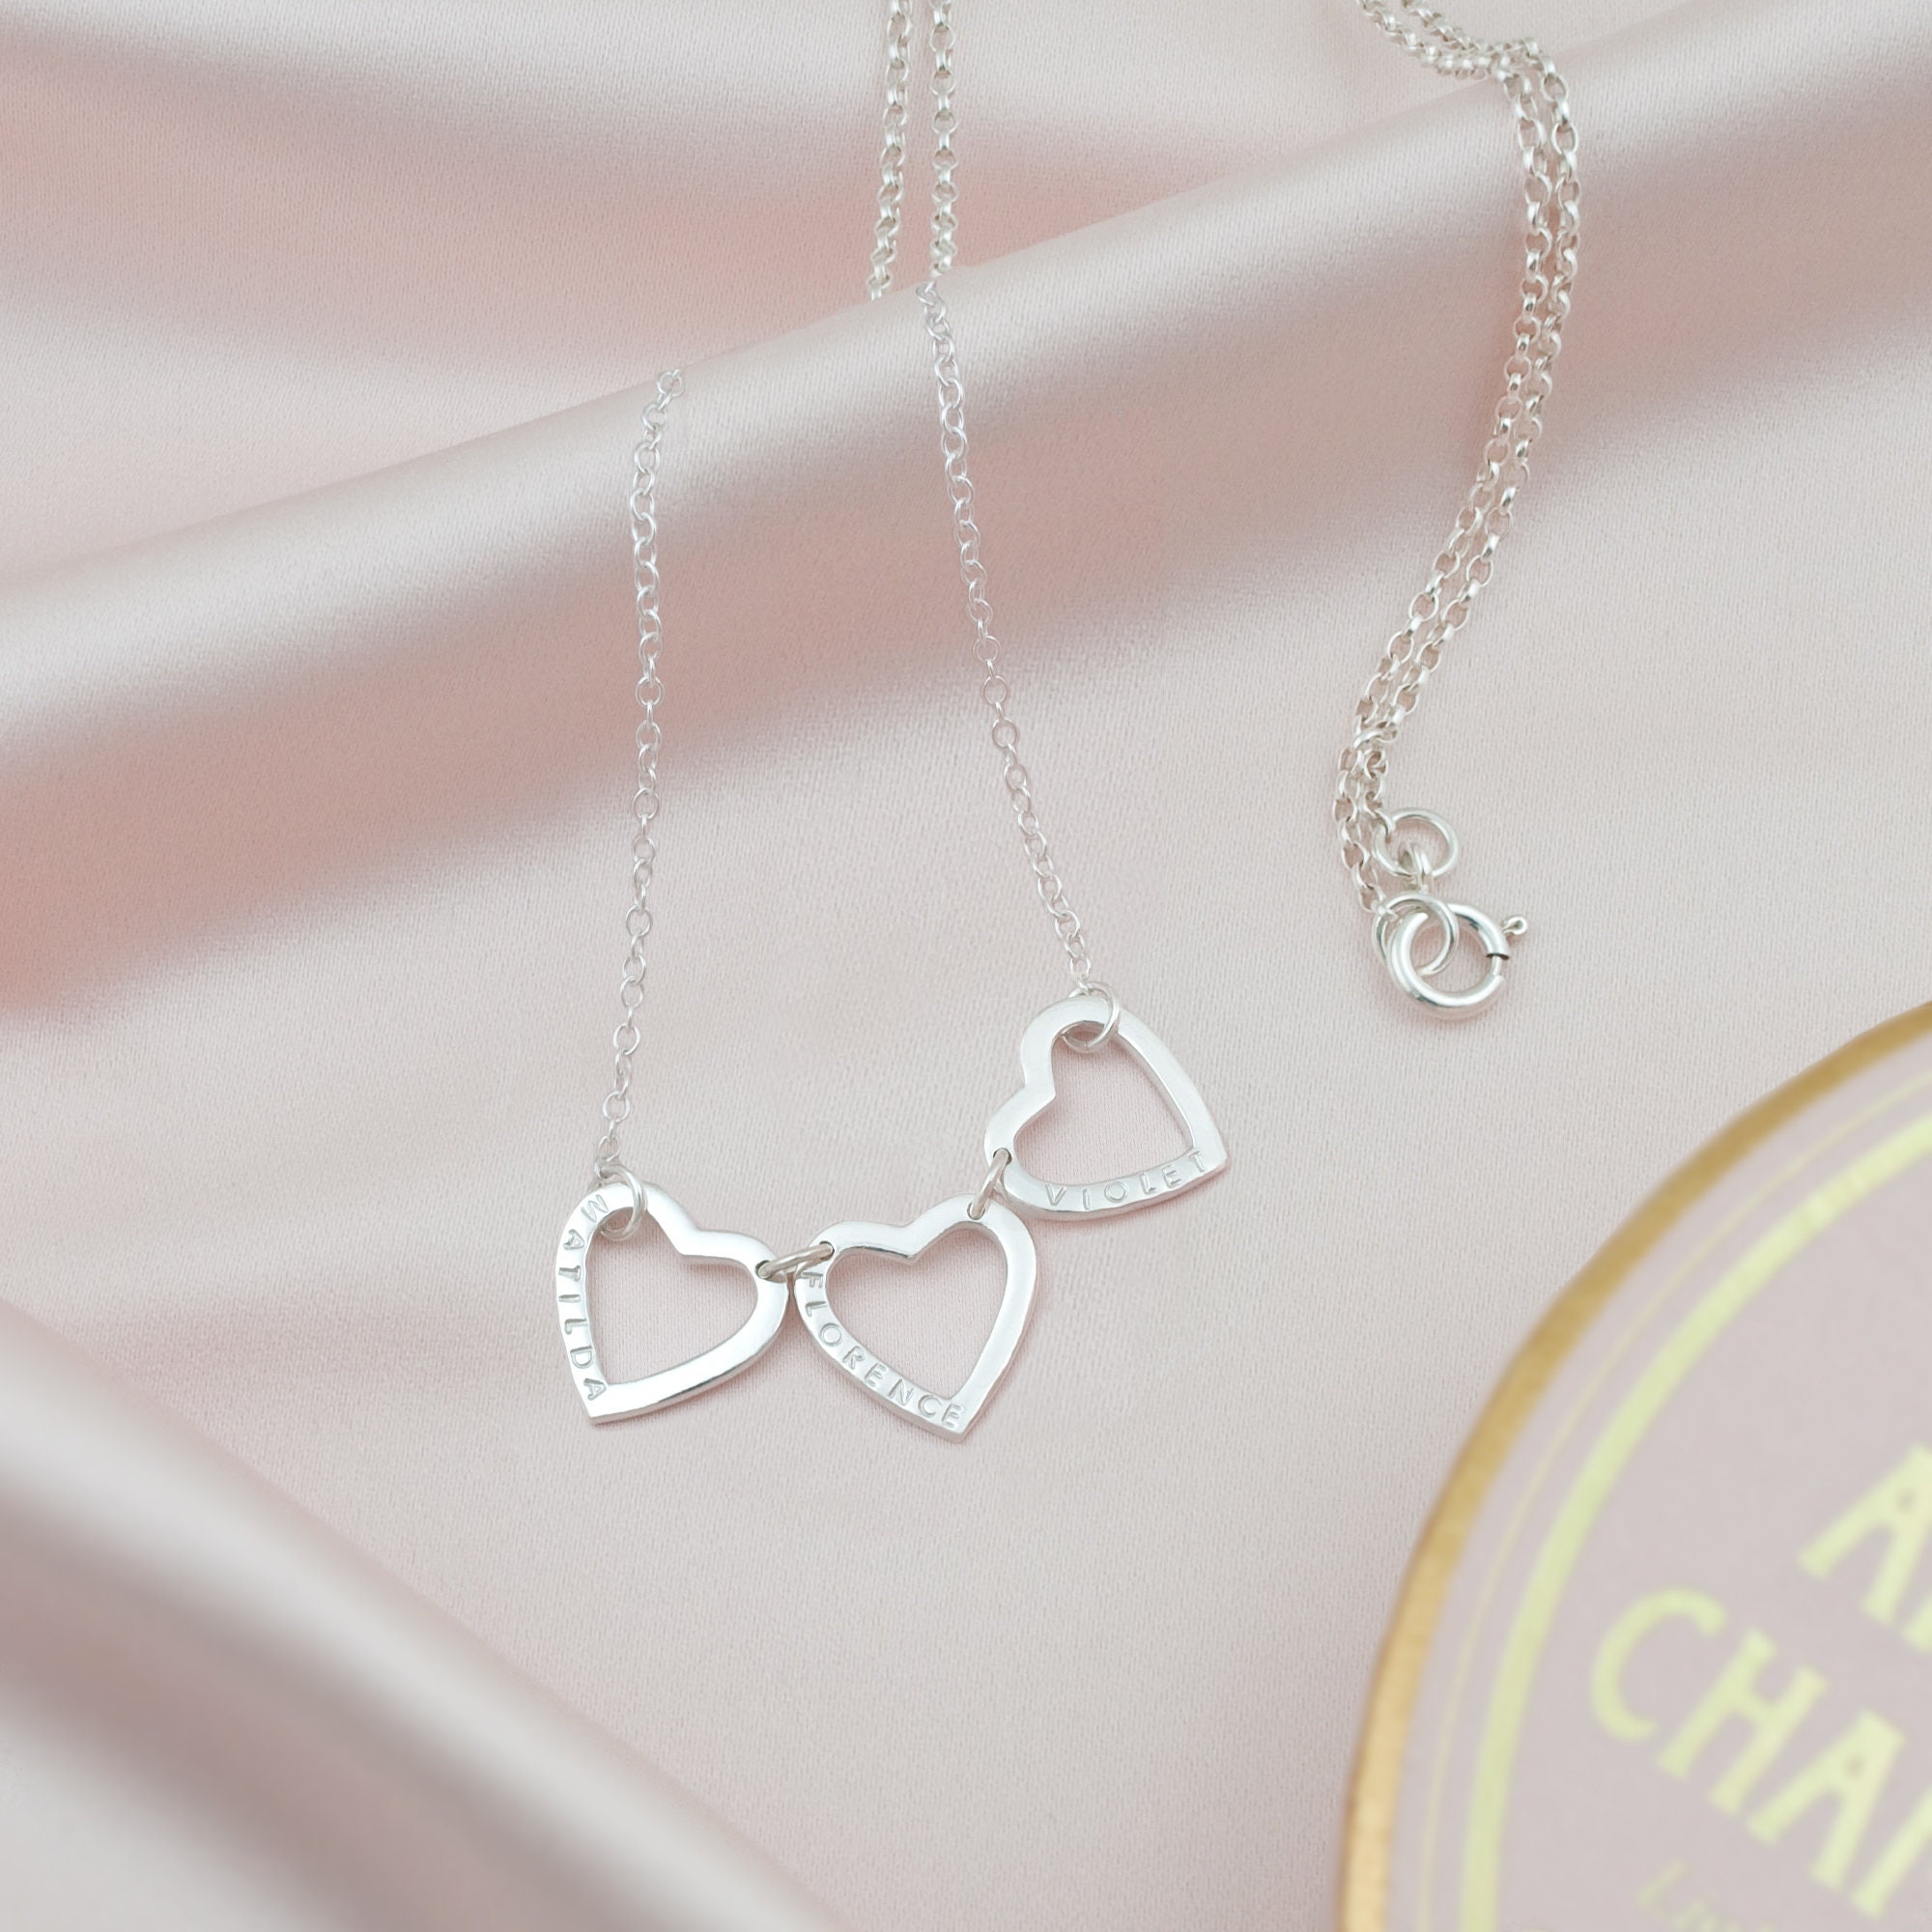 Triple Name Necklace - 3 Hearts For Names, Personalised Family